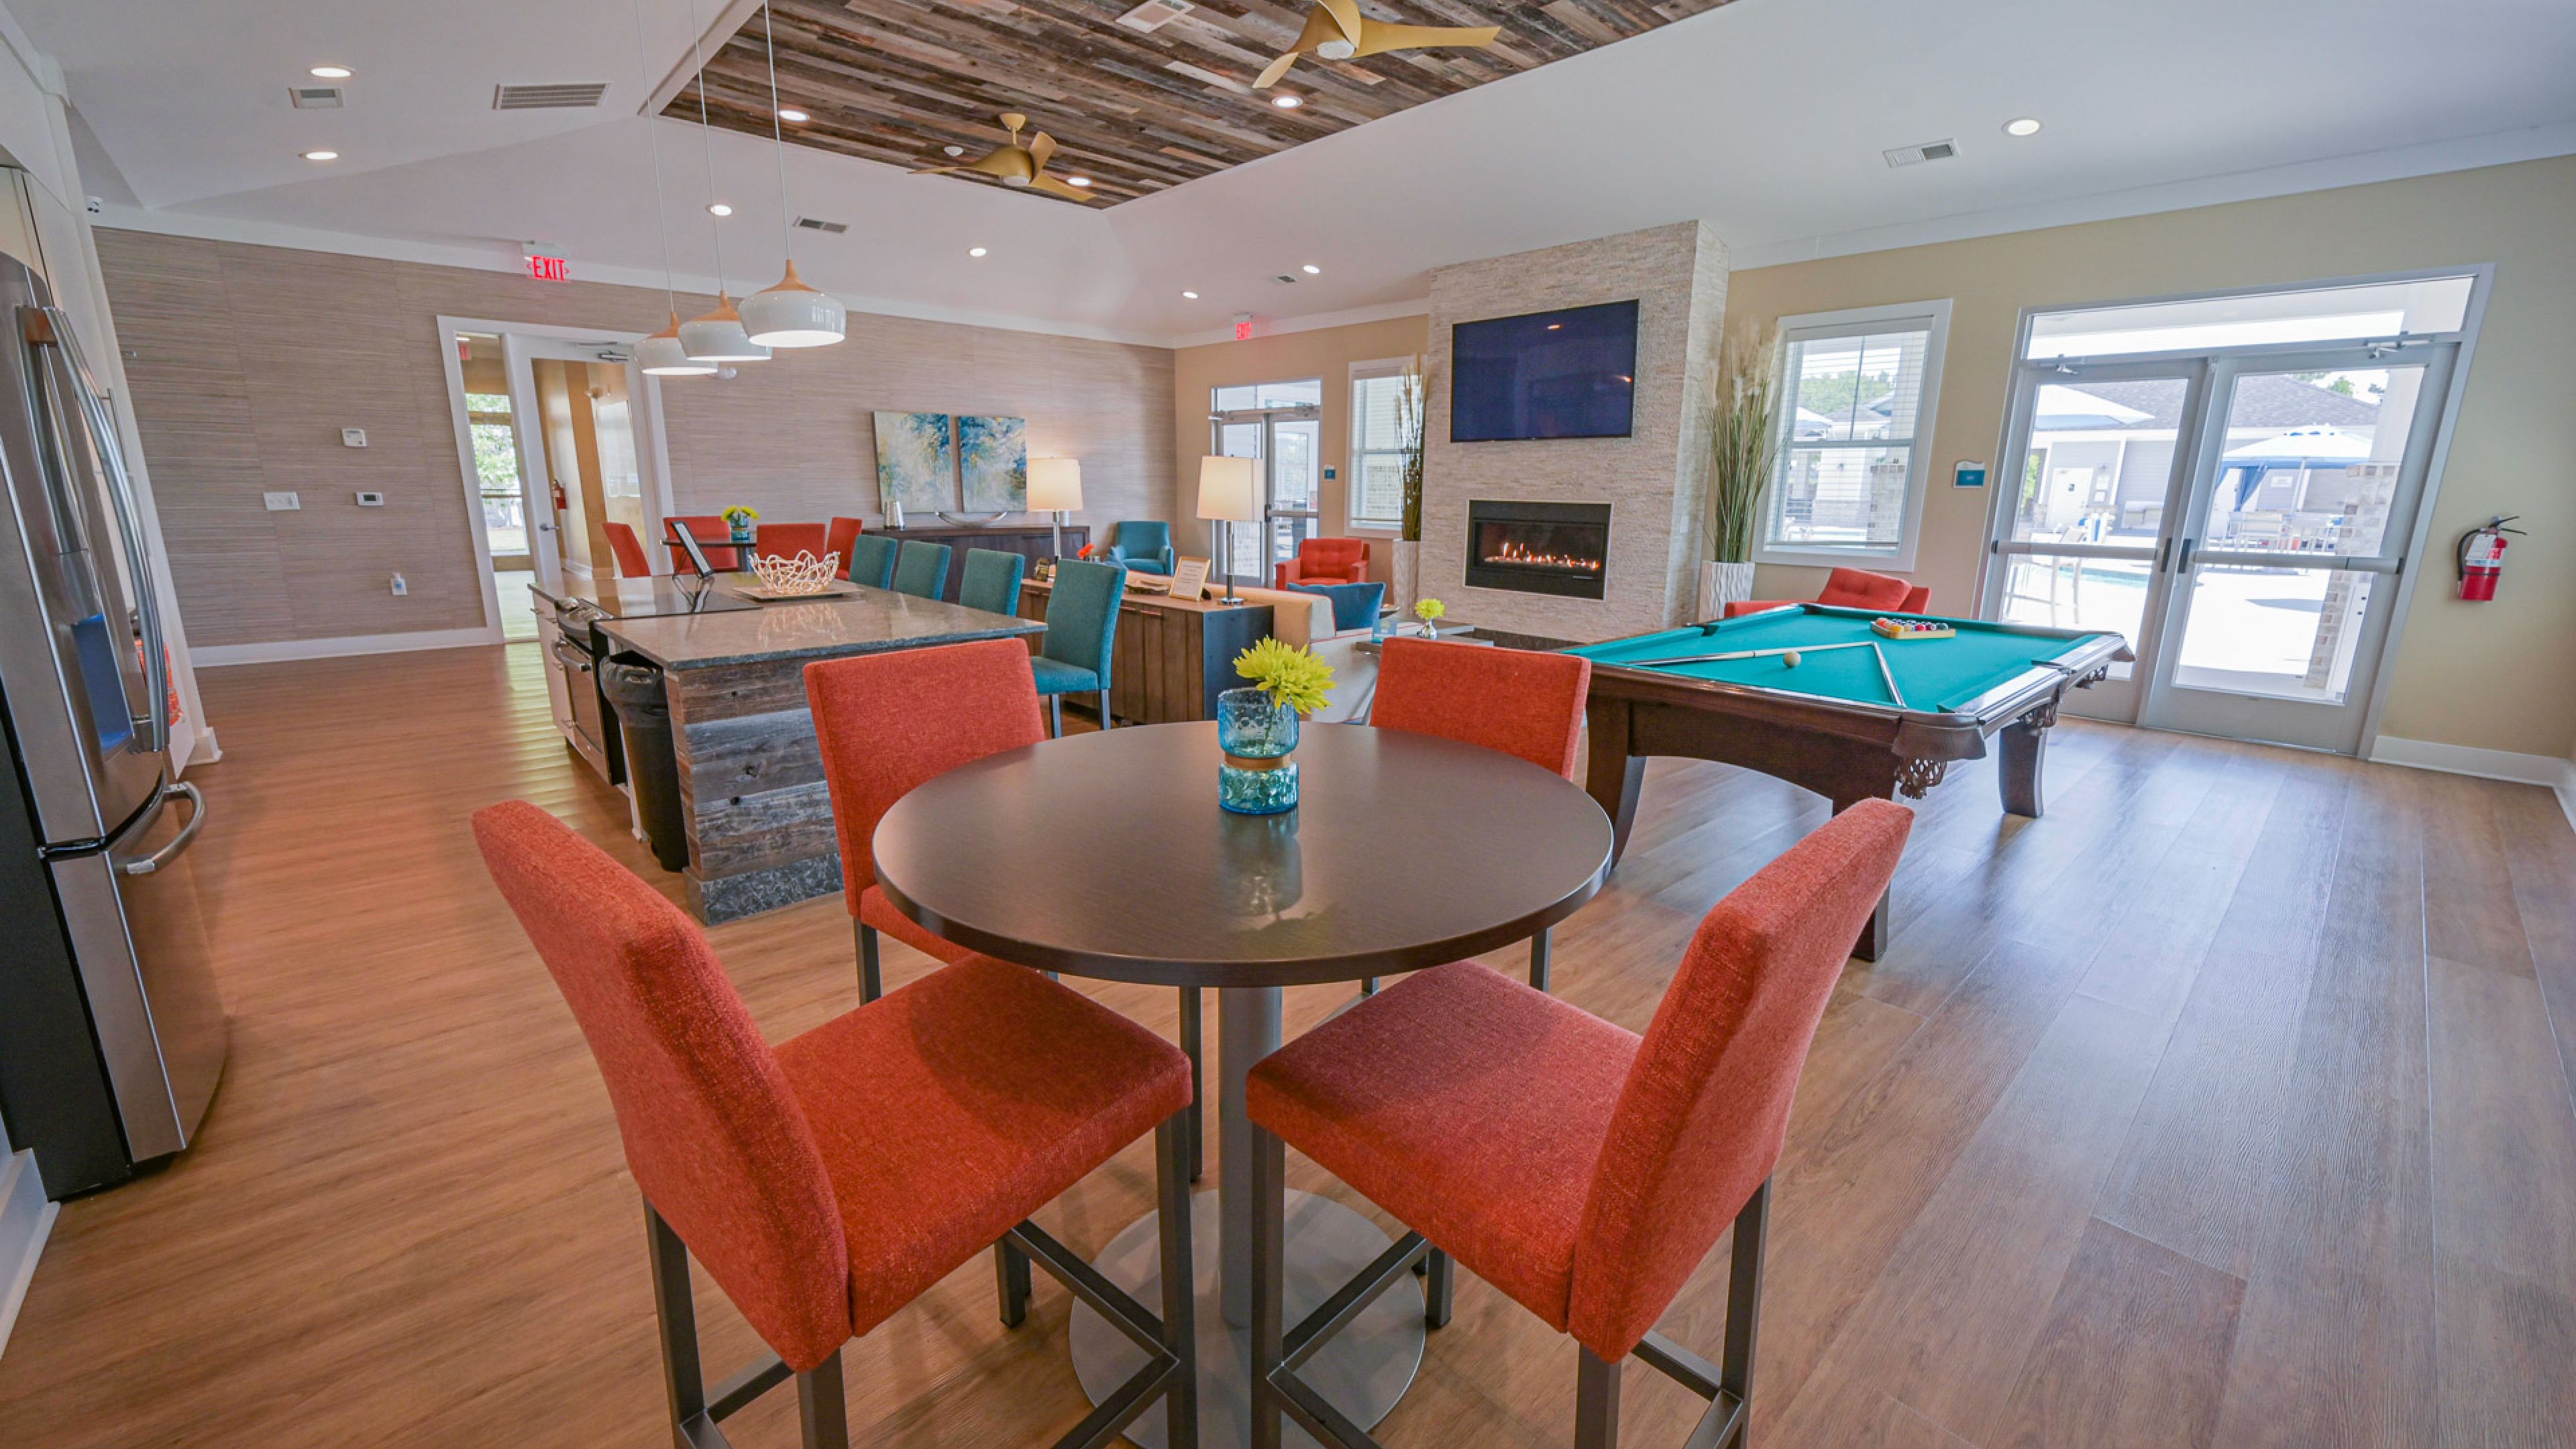 Hawthorne at Leland resident clubhouse amenity with seating area and beautiful finishes